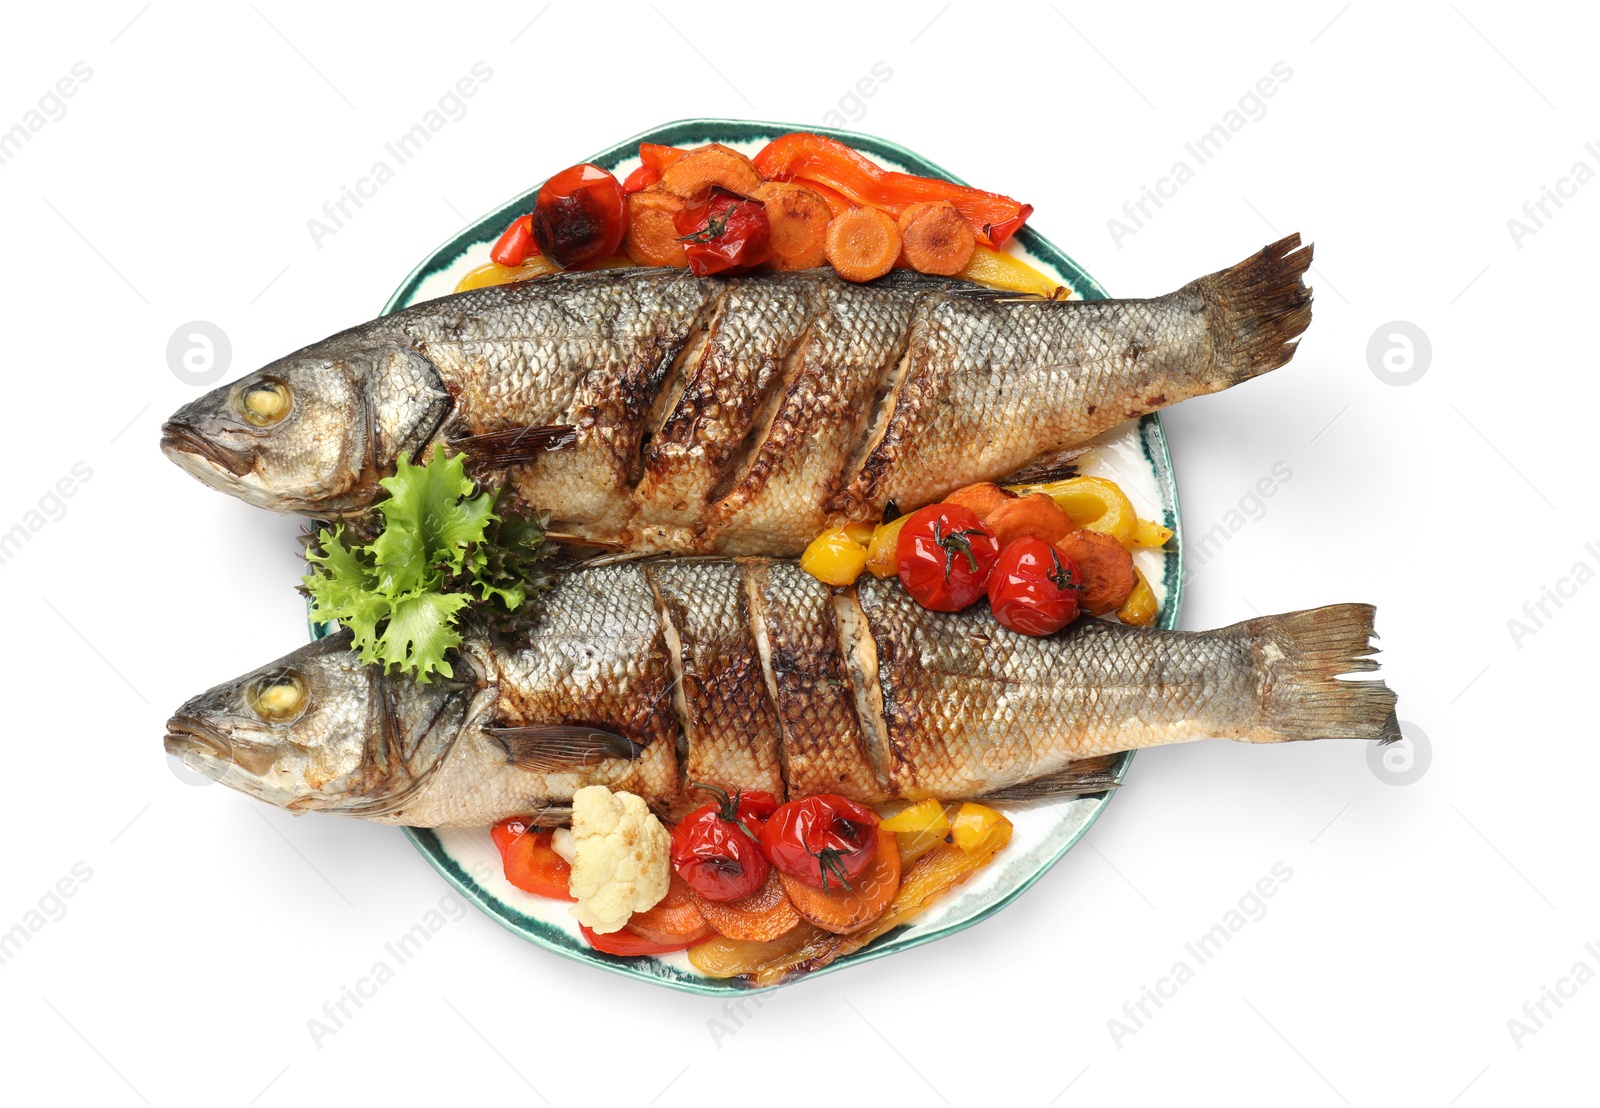 Photo of Plate with delicious baked sea bass fish and vegetables on white background, top view